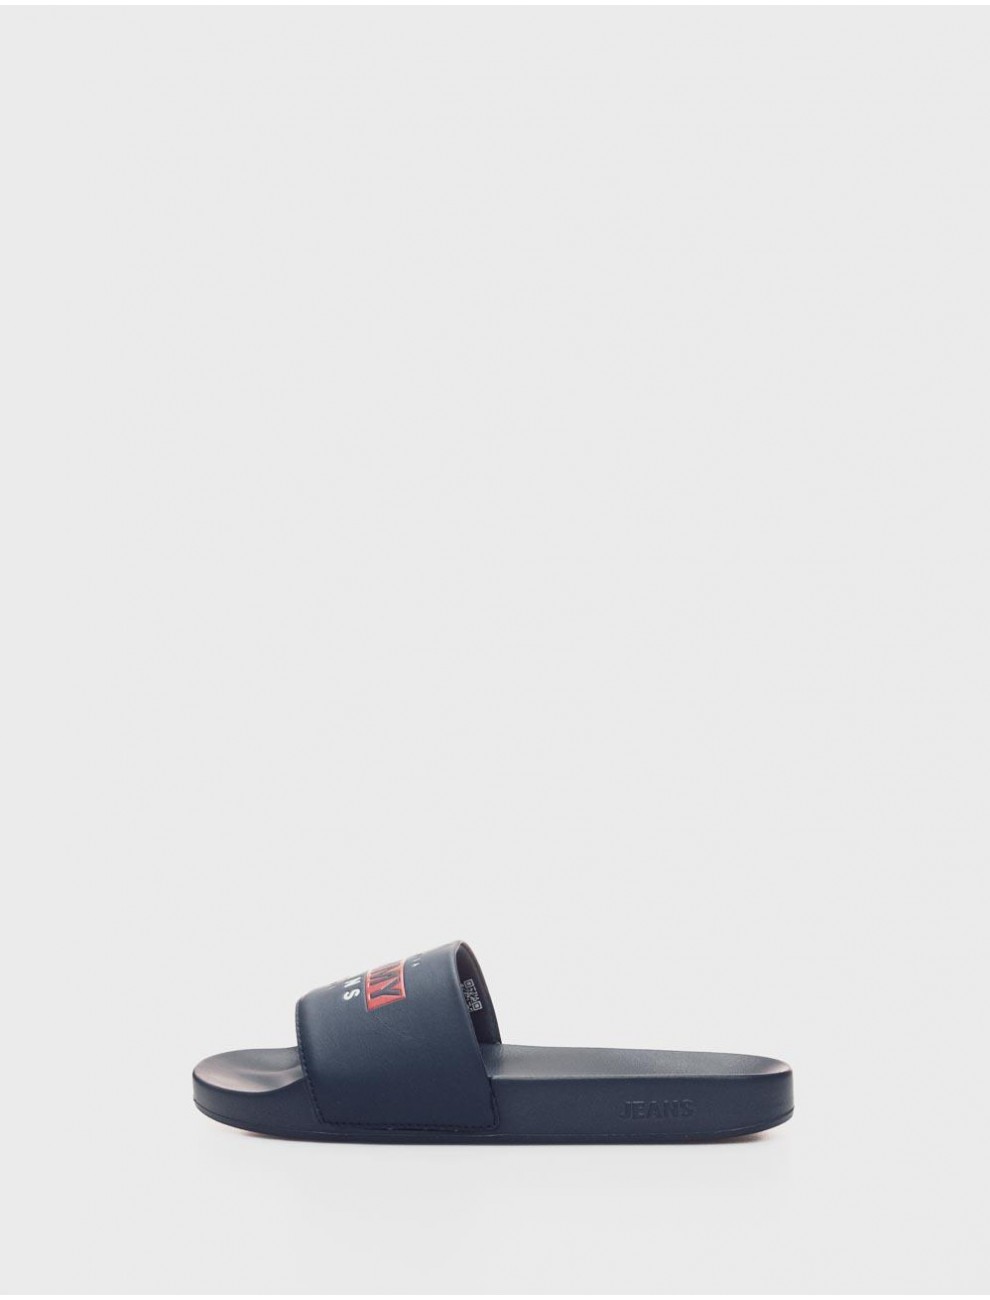 Chanclas Tommy Hilfiger Tommy Jeans Marino | Kamomeshop.es